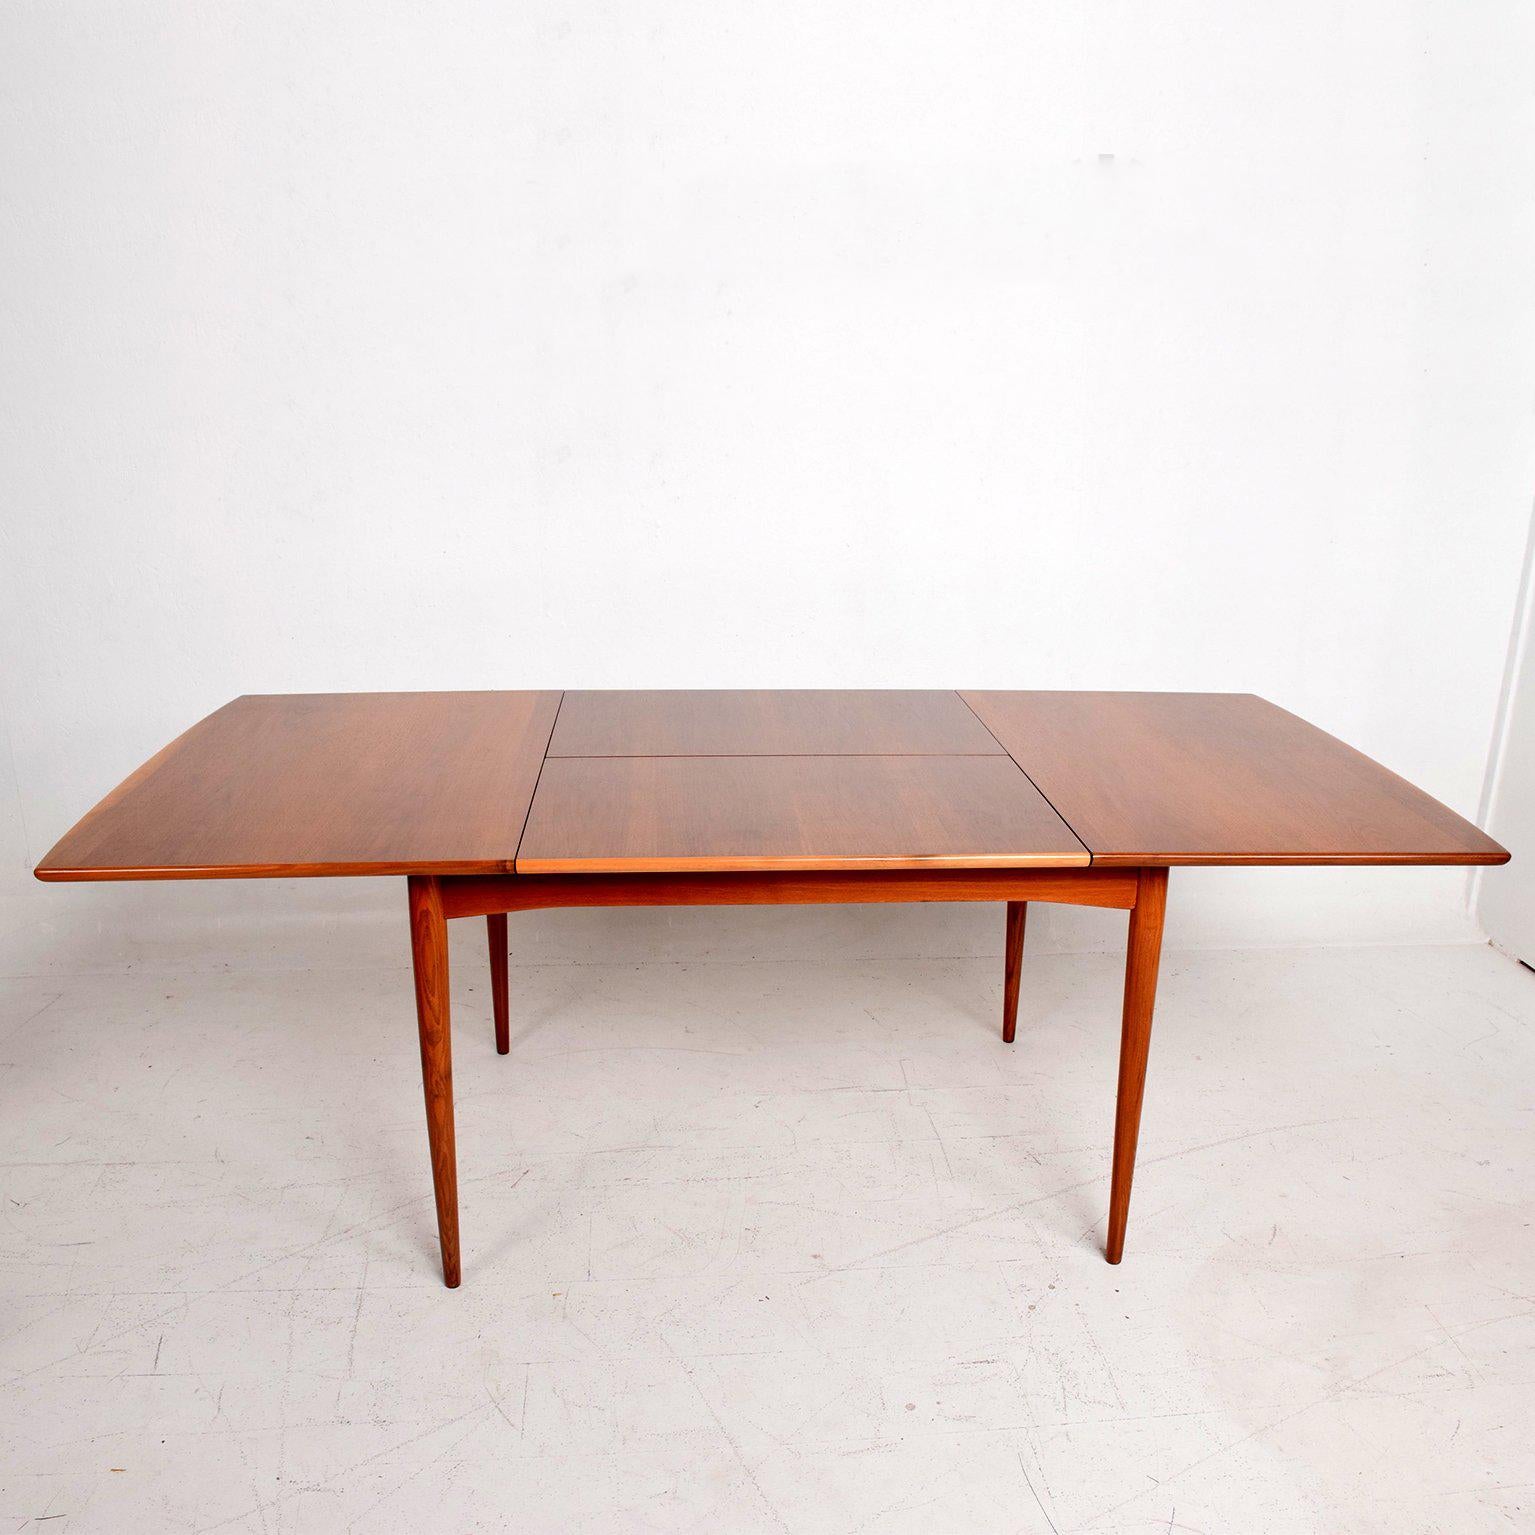 Oak Mid-Century Modern Walnut Dining Table with Built in Extension